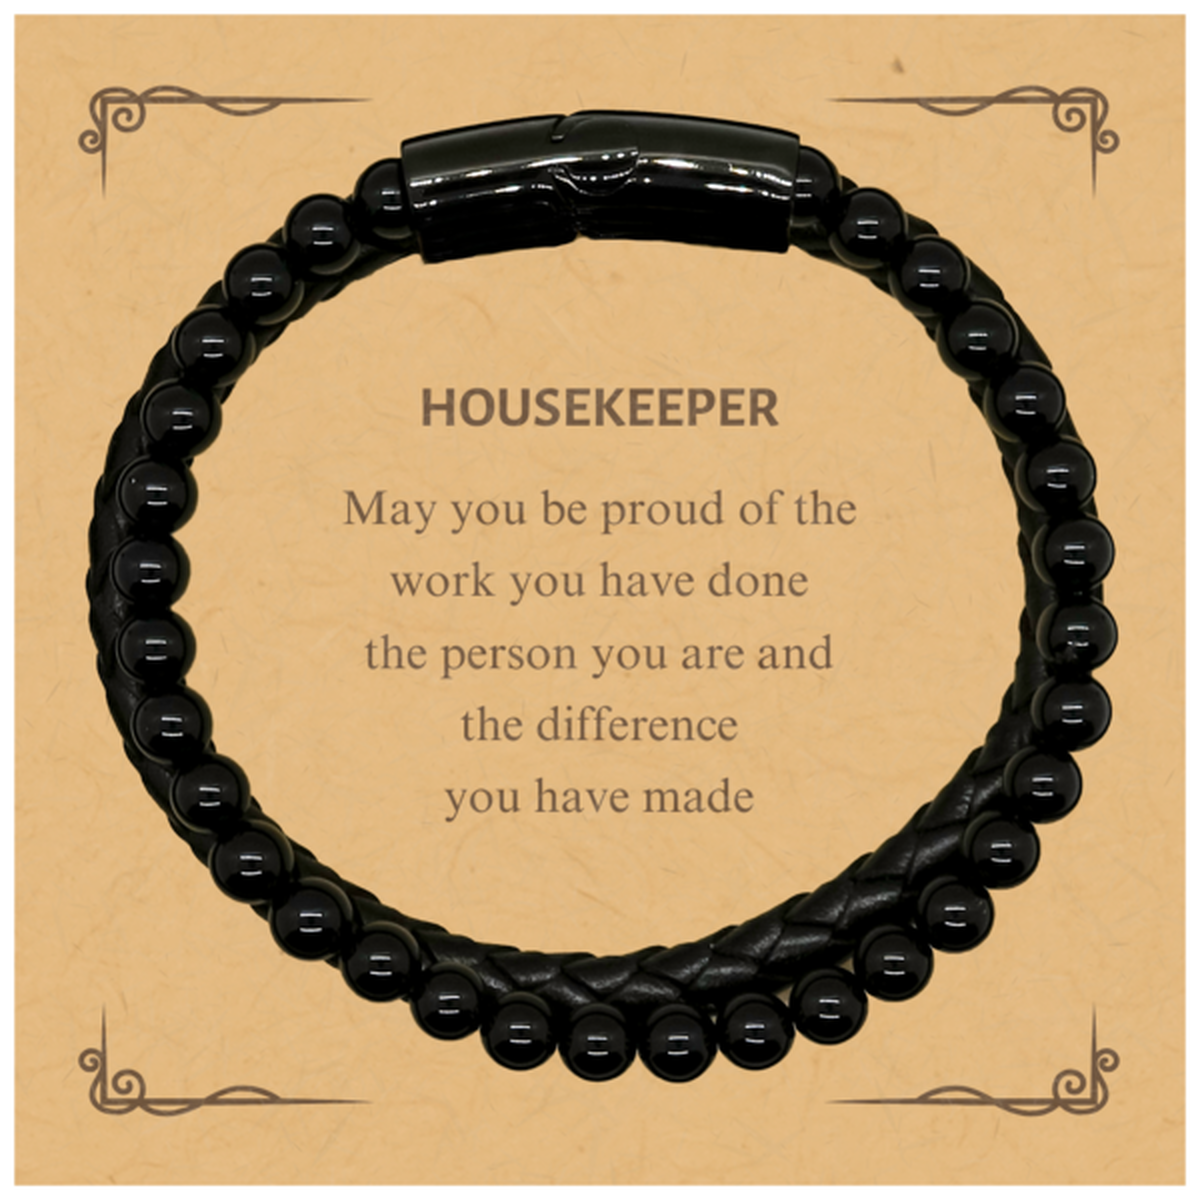 Housekeeper May you be proud of the work you have done, Retirement Housekeeper Stone Leather Bracelets for Colleague Appreciation Gifts Amazing for Housekeeper